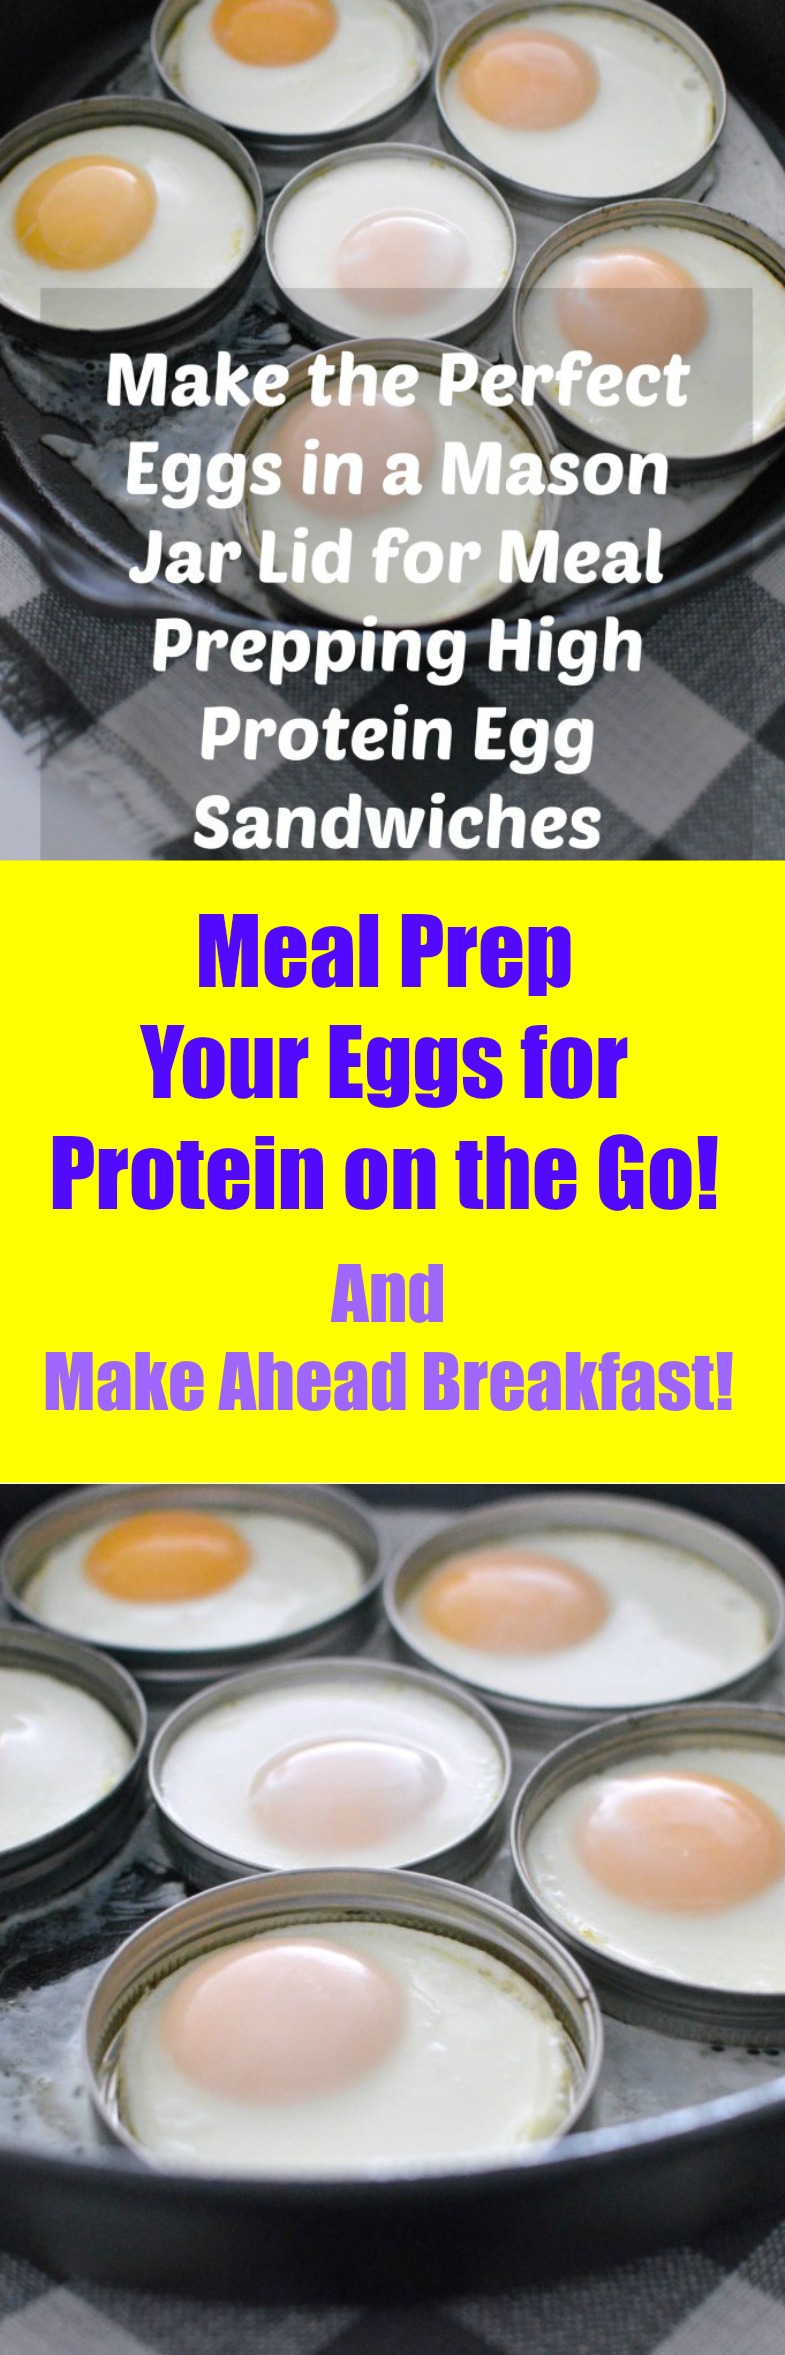 Meal Prep eggs in a mason jar lid! Kitchen Hack equals a healthy breakfast on the go. High protein equals weight loss.